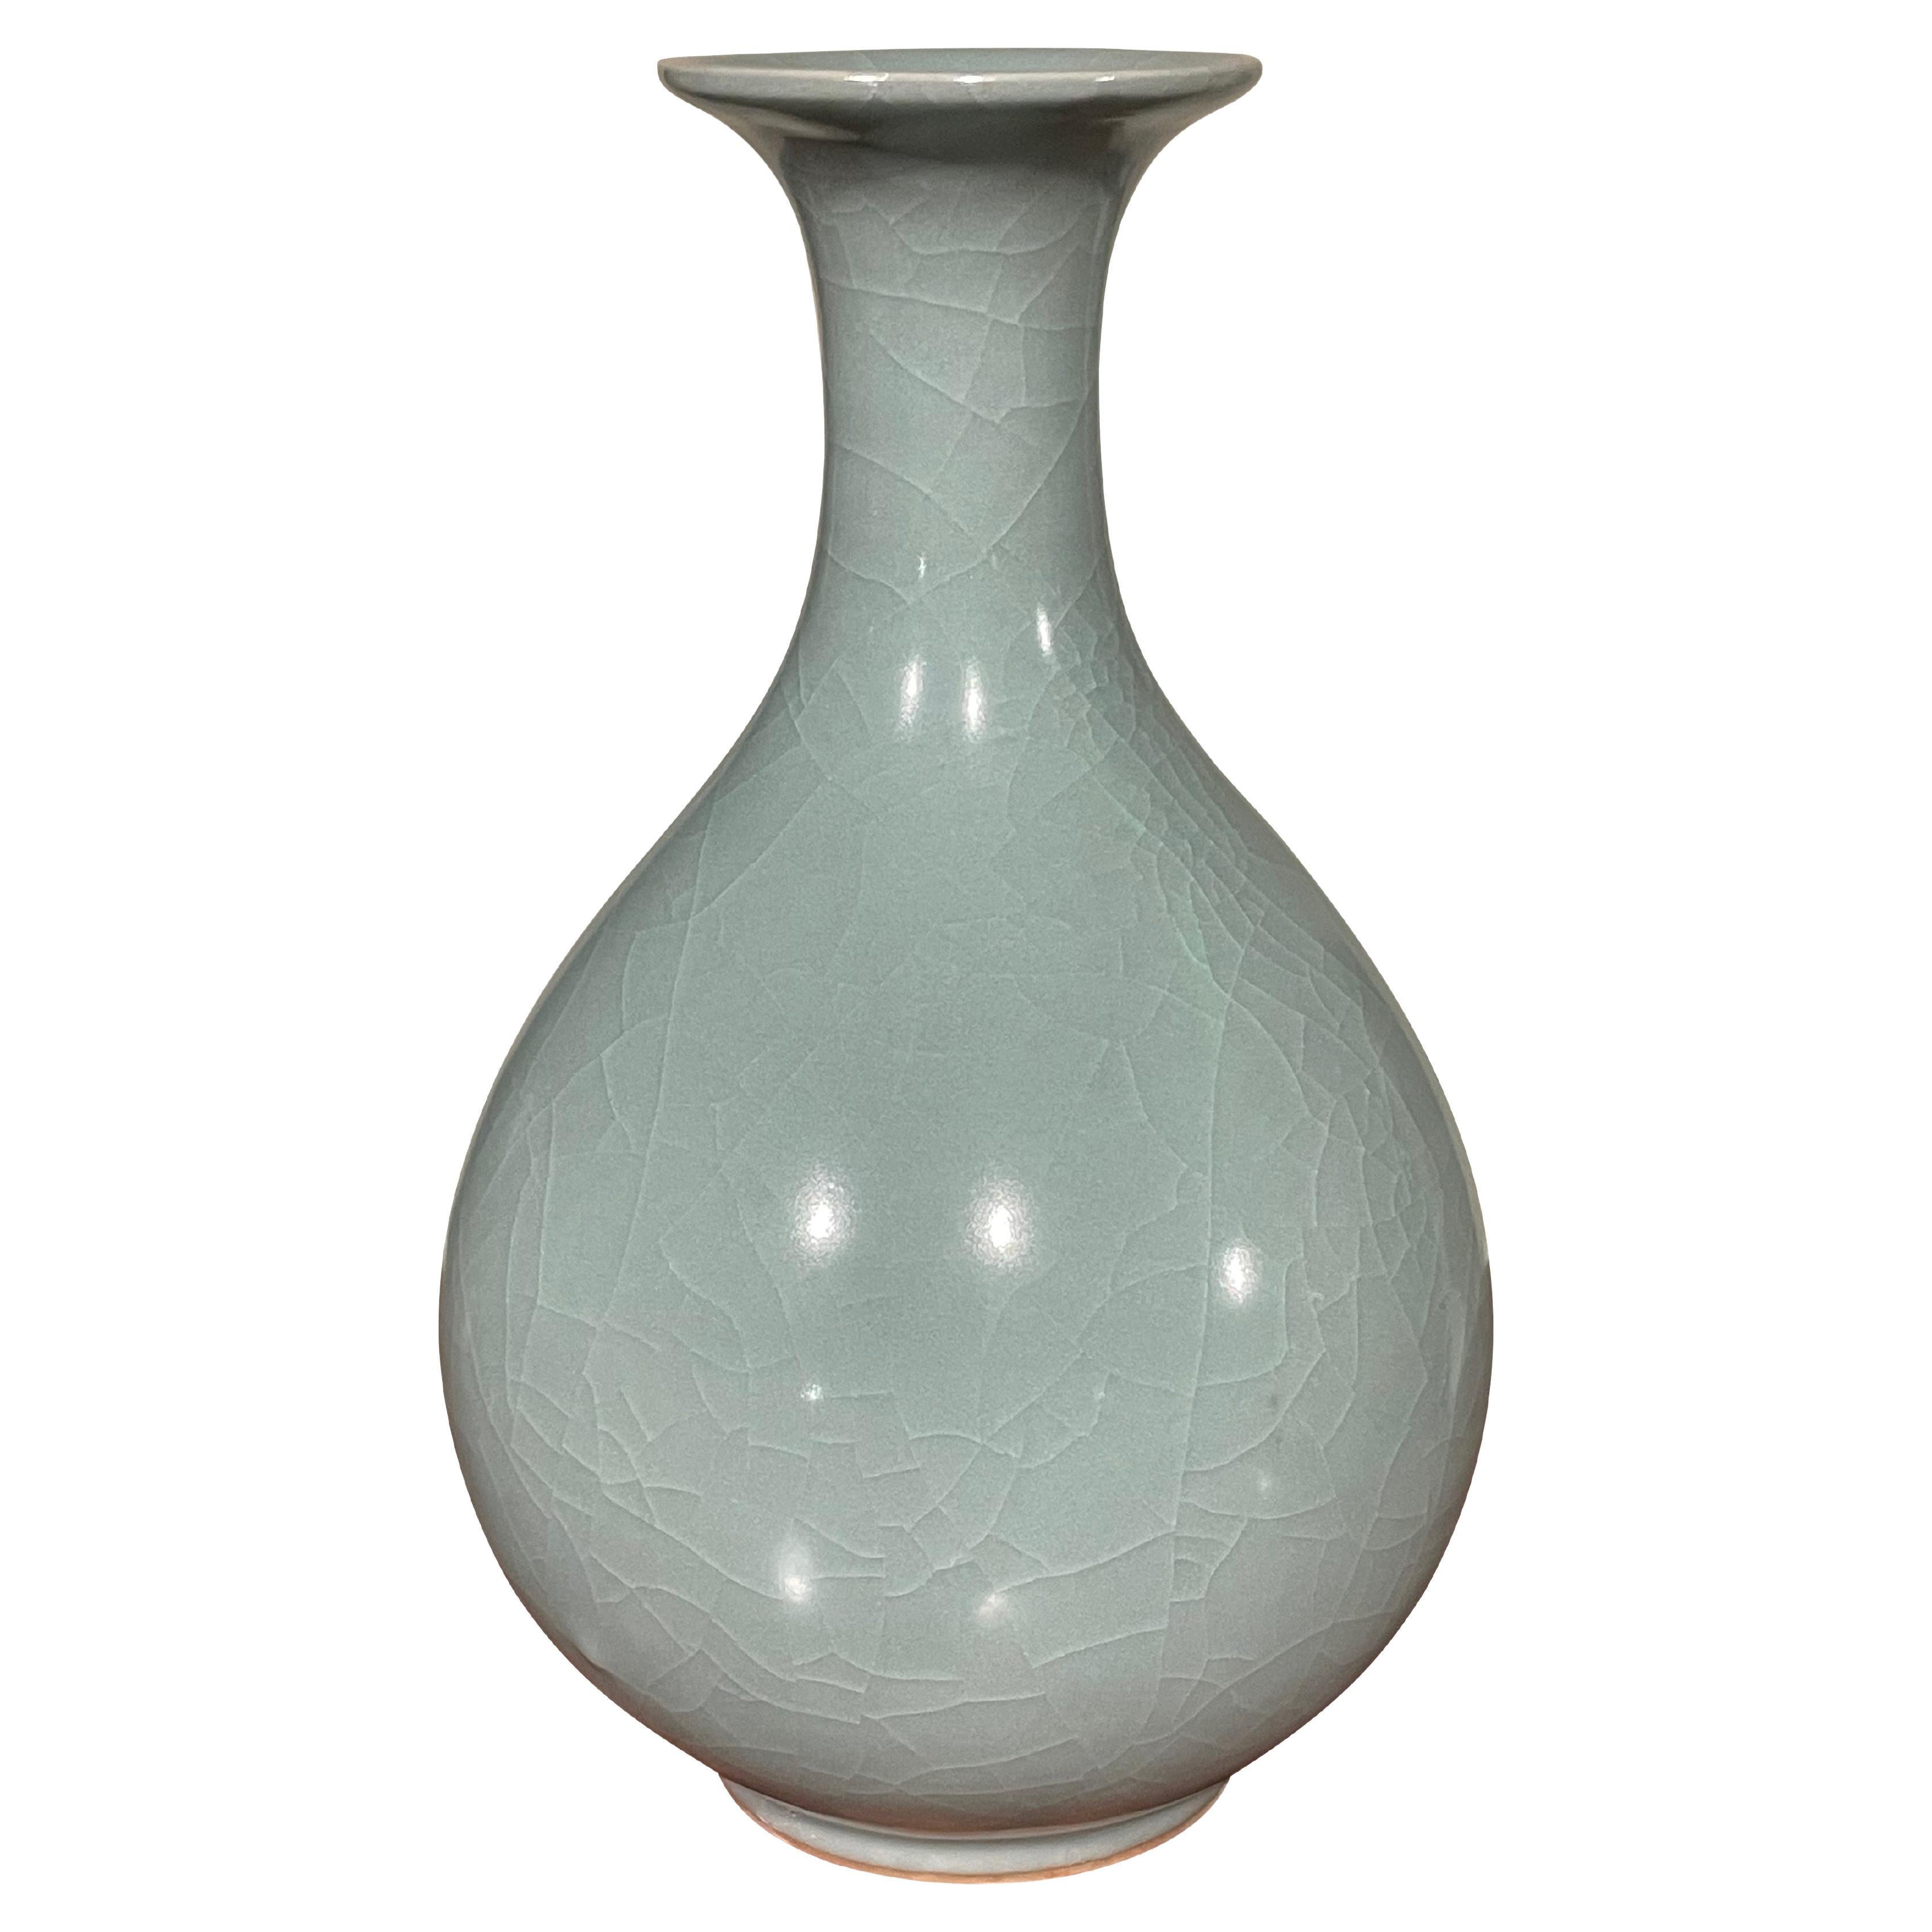 Pale Turquoise Classic Shape With Rounded Bottom Vase, China, Contemporary